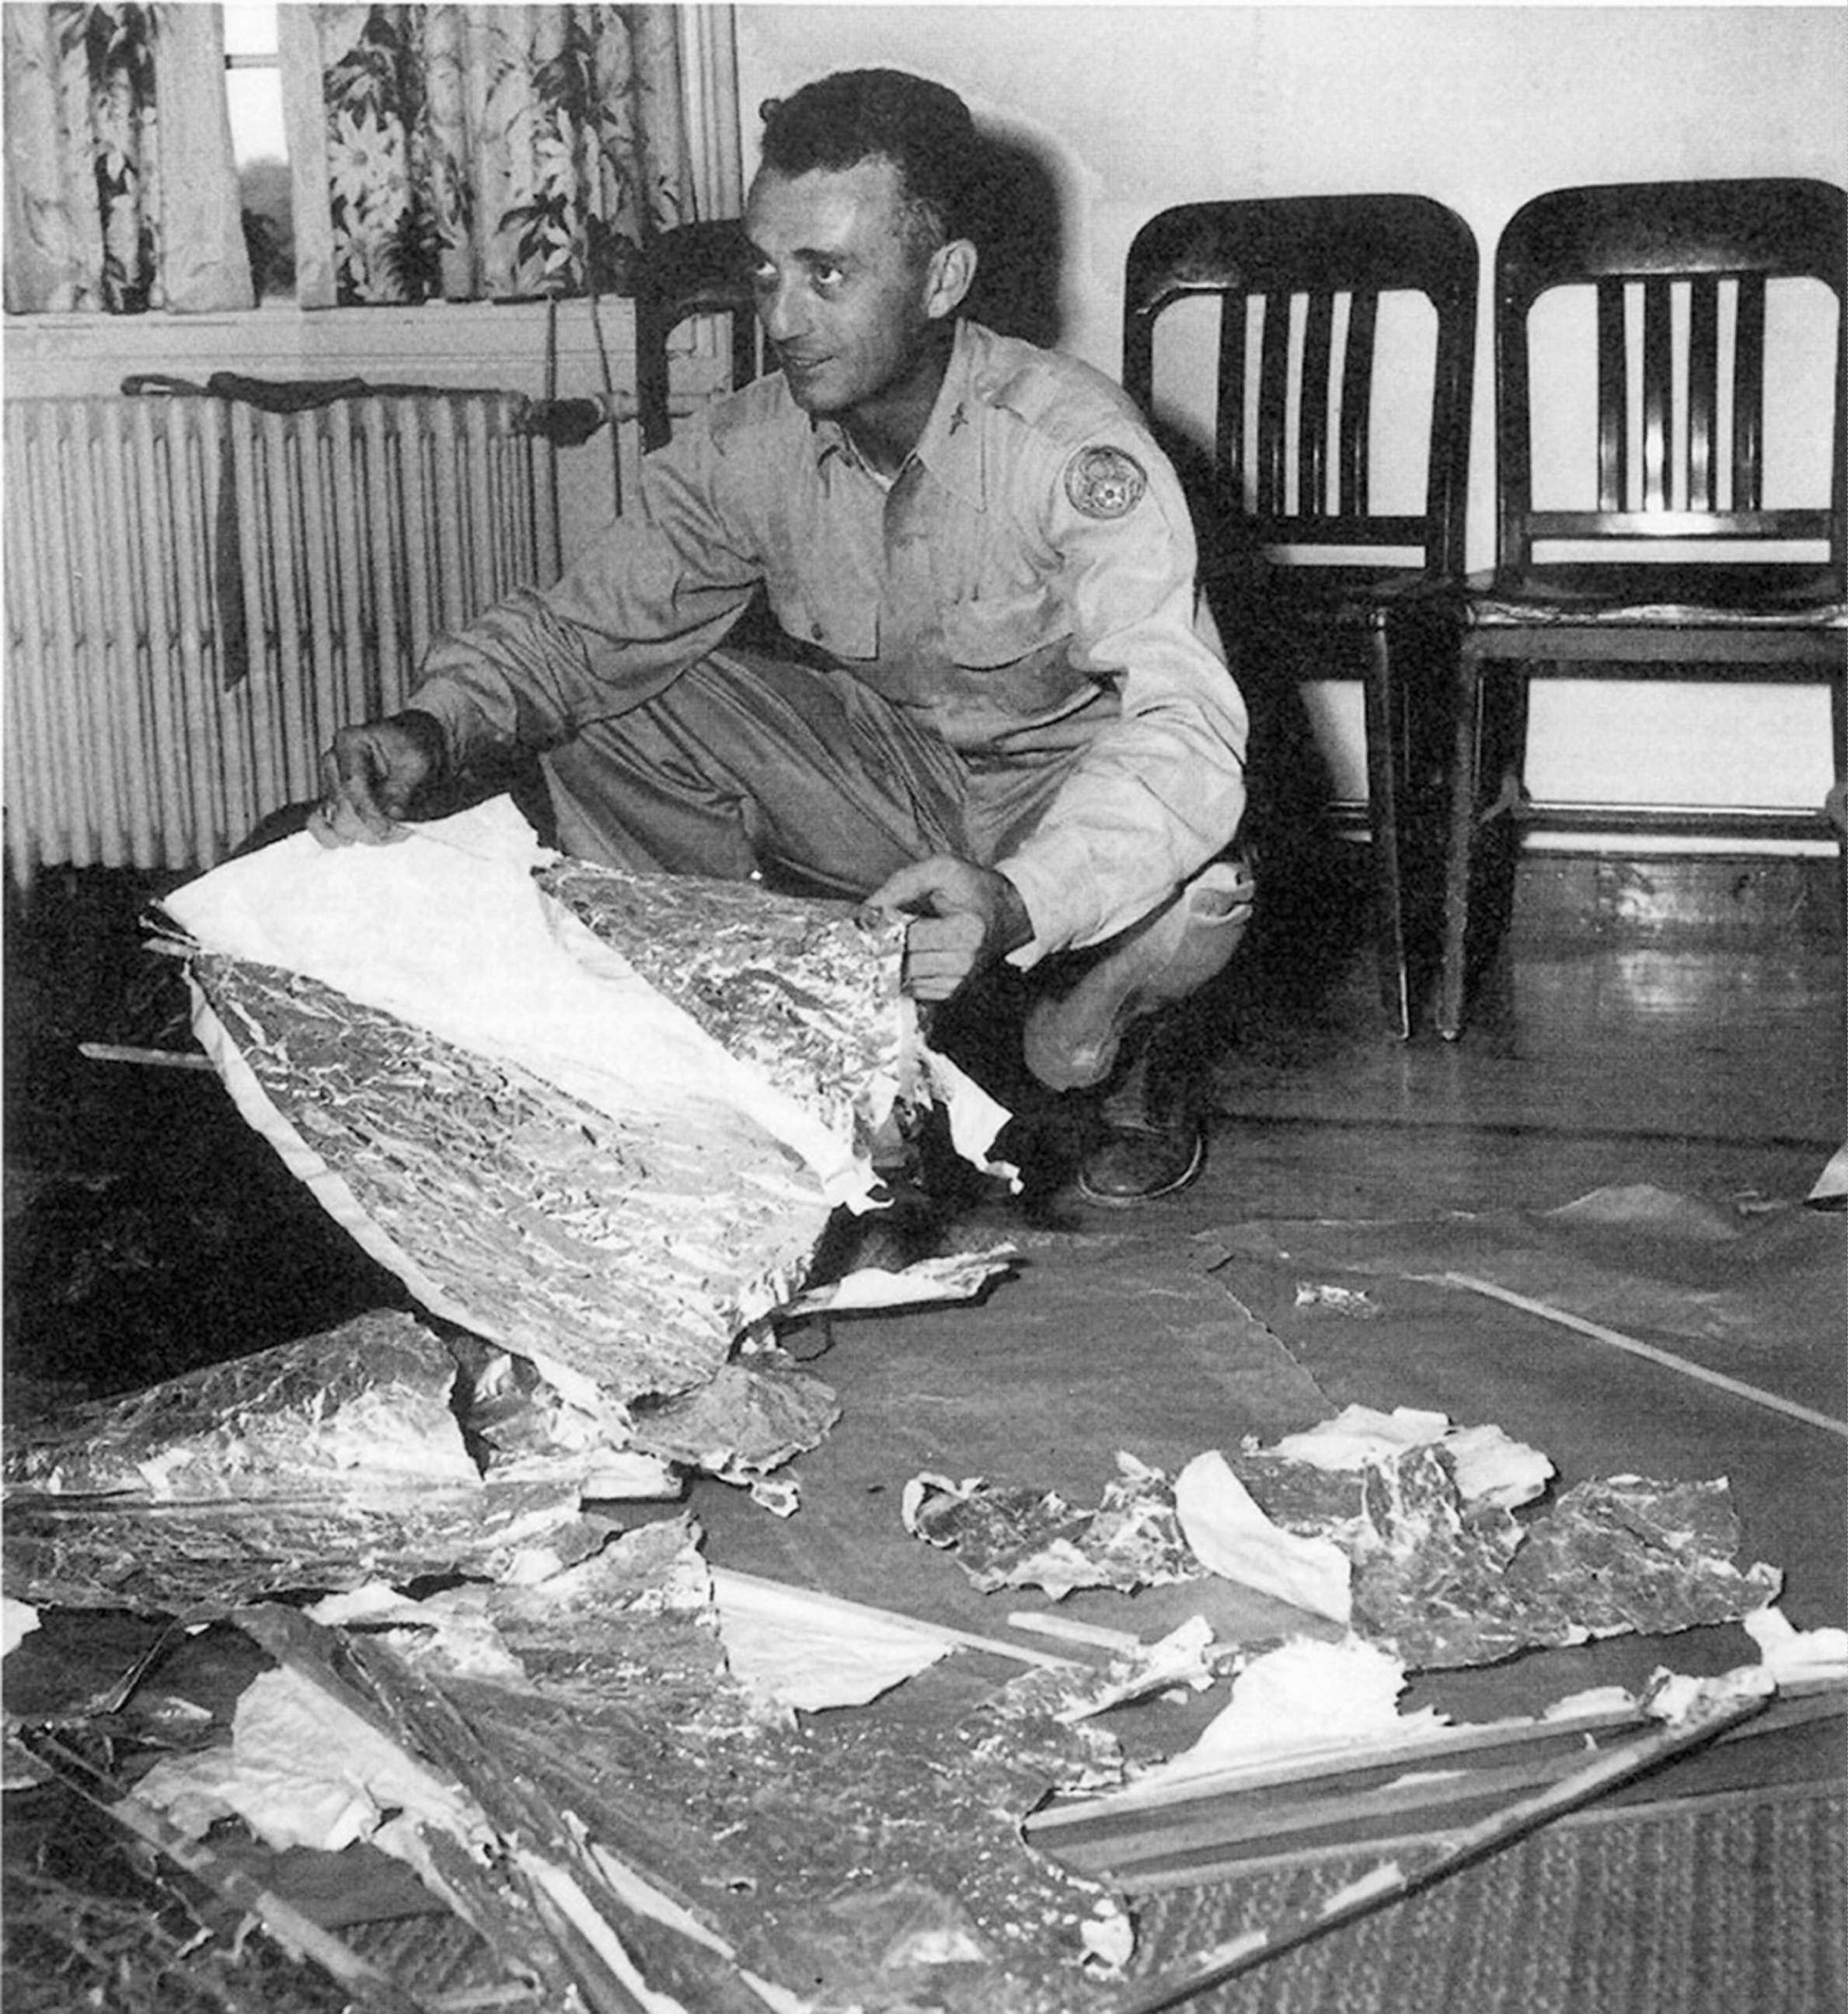 PHOTO: Major Jesse Marcel from the Roswell Army Air Field with debris found 75 miles north west of Roswell, N.M., in June 1947.